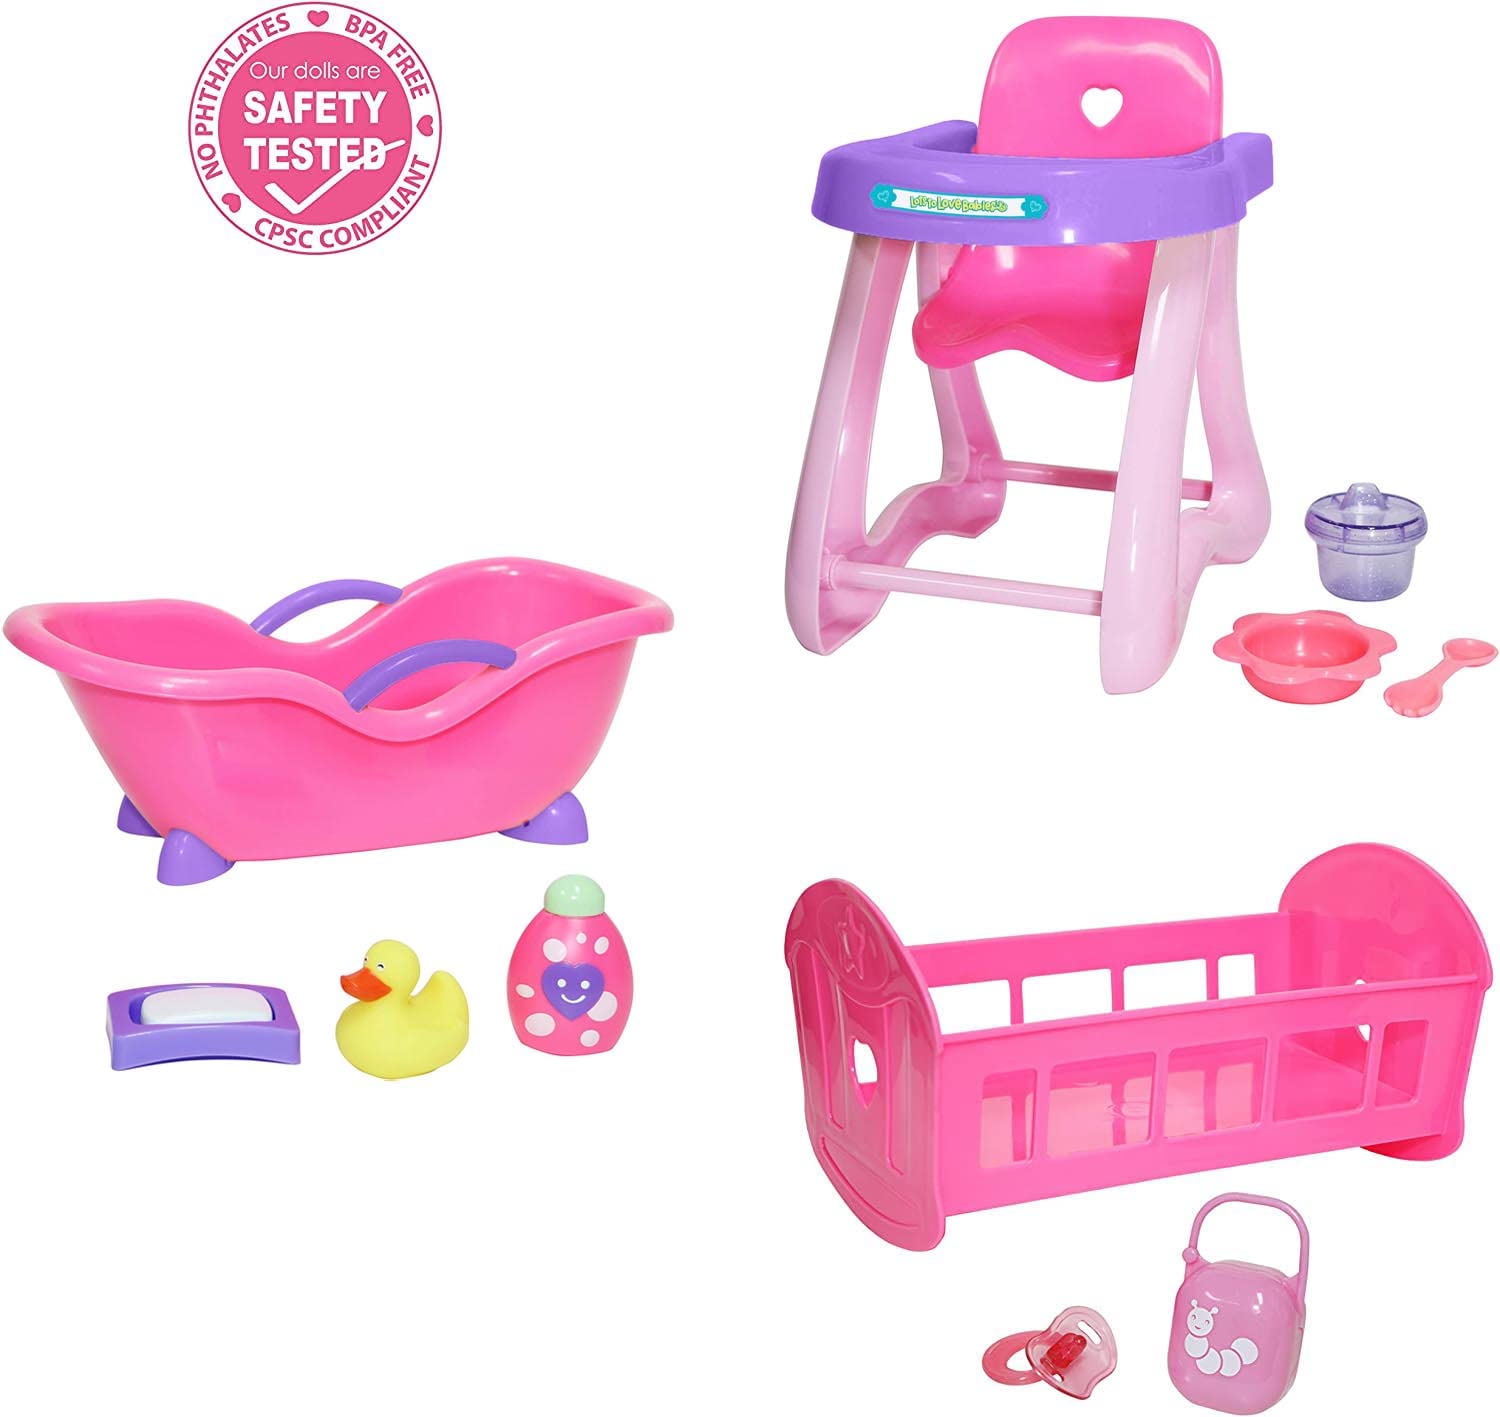 JC Toys Deluxe Doll Accessory Bundle | High Chair, Crib, Bath and Extra Accessories for Dolls up to 11